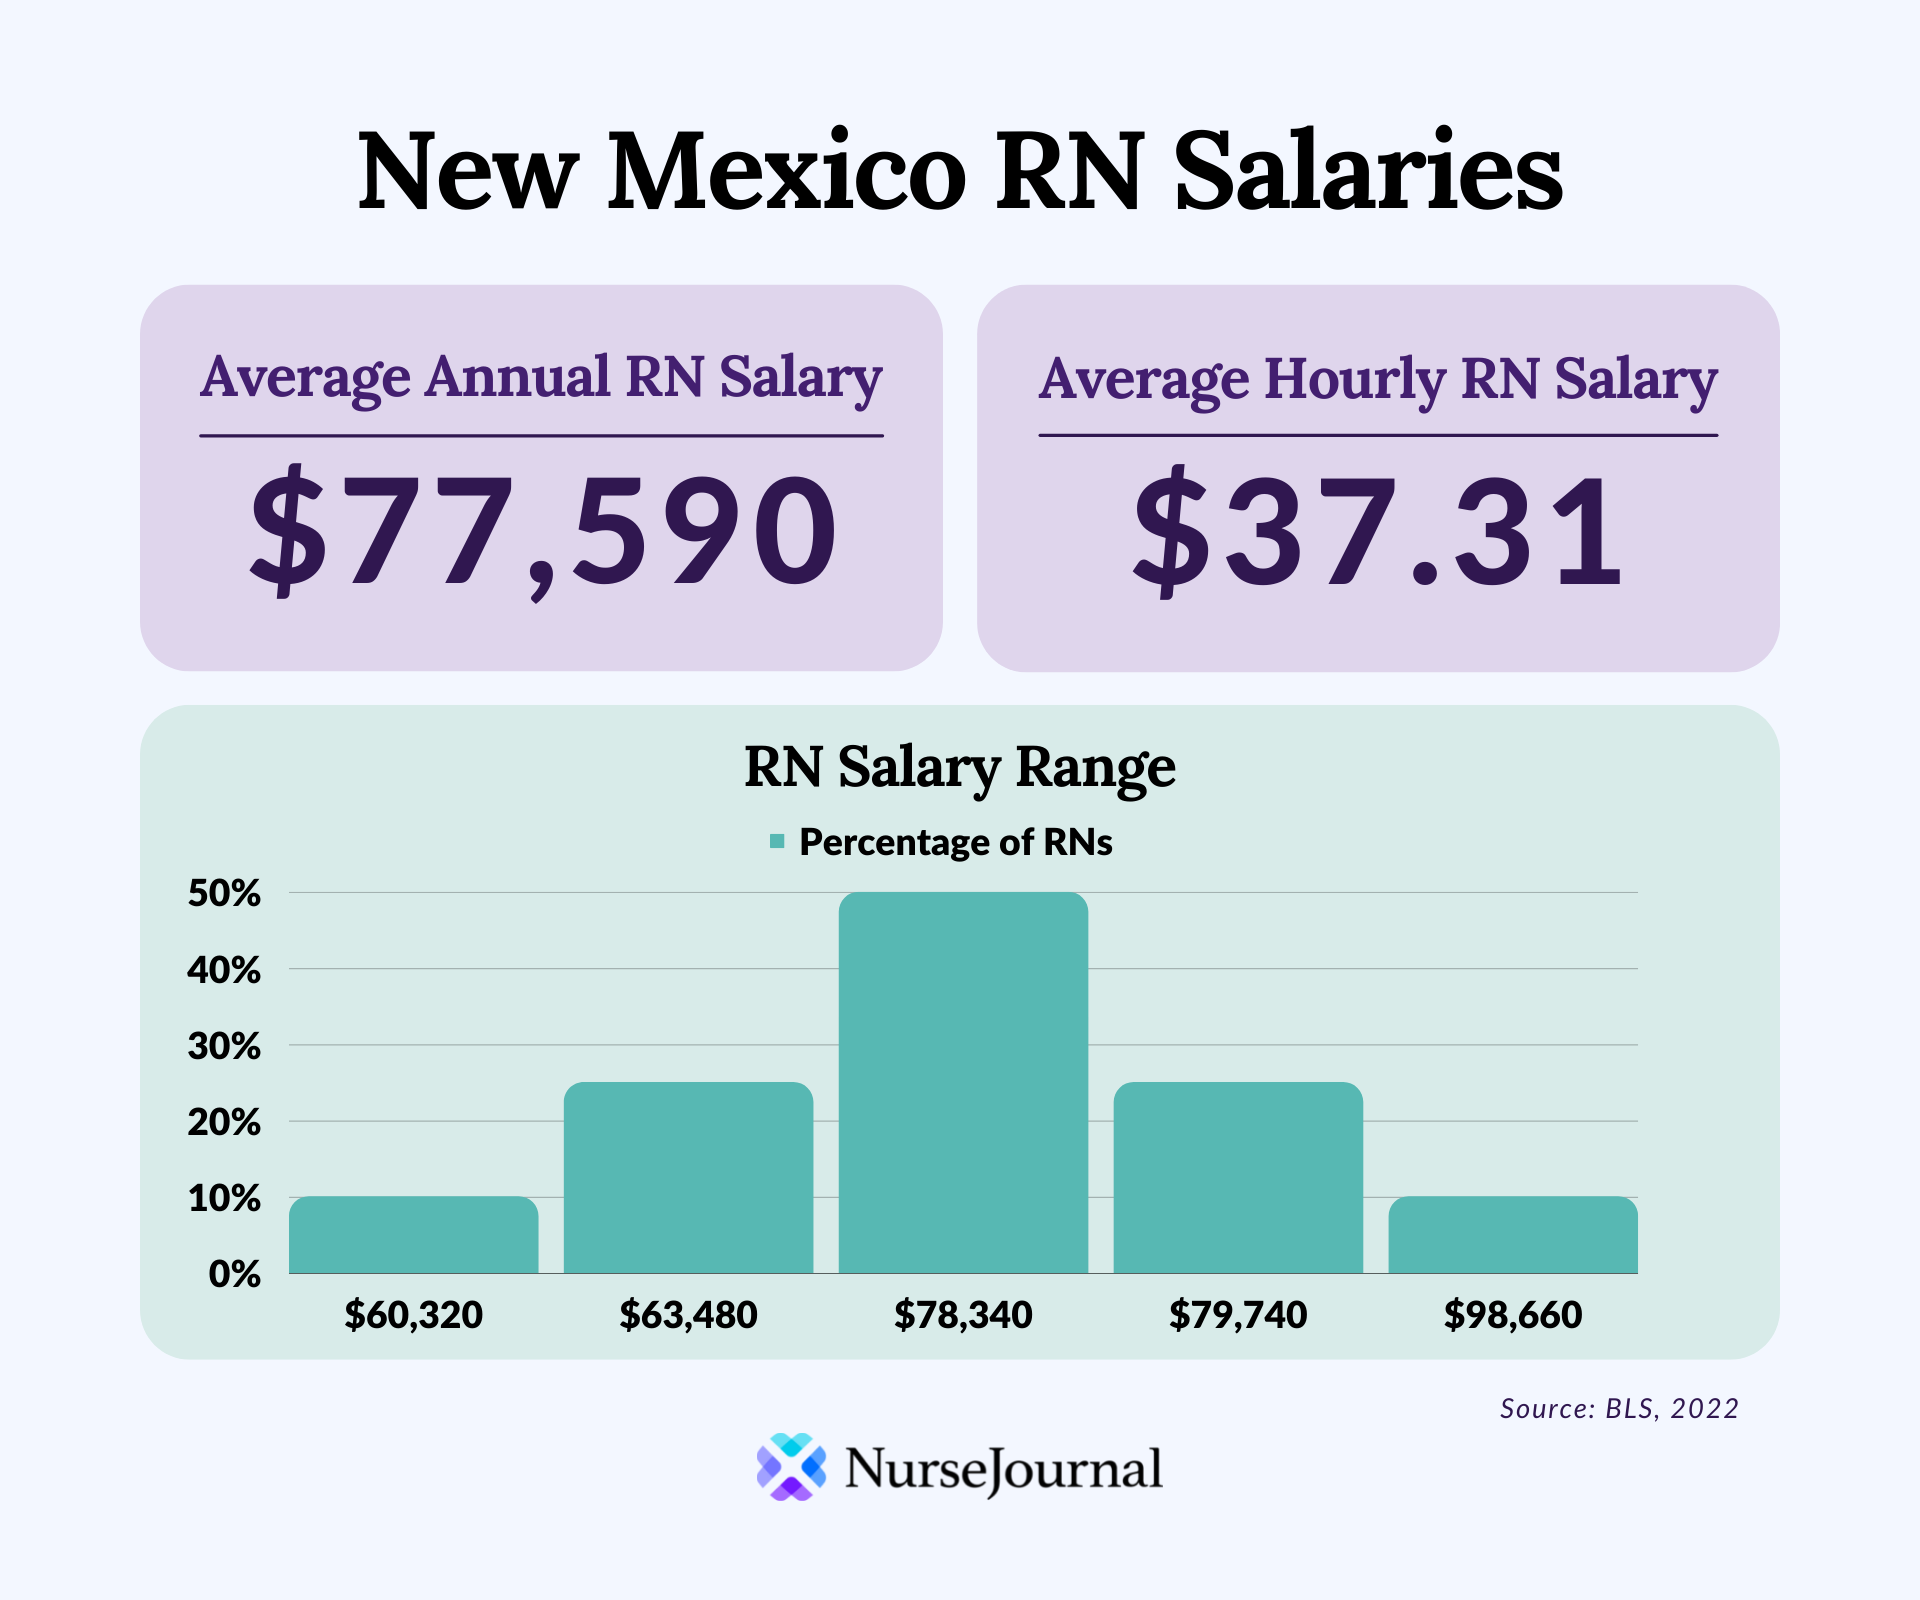 Infographic of registered nursing salary data in New Mexico. The average annual RN salary is $77,590. The average hourly RN salary is $37.31. Average RN salaries range from $60,320 among the bottom 10th percentile of earners to $98,660 among the top 90th percentile of earners.